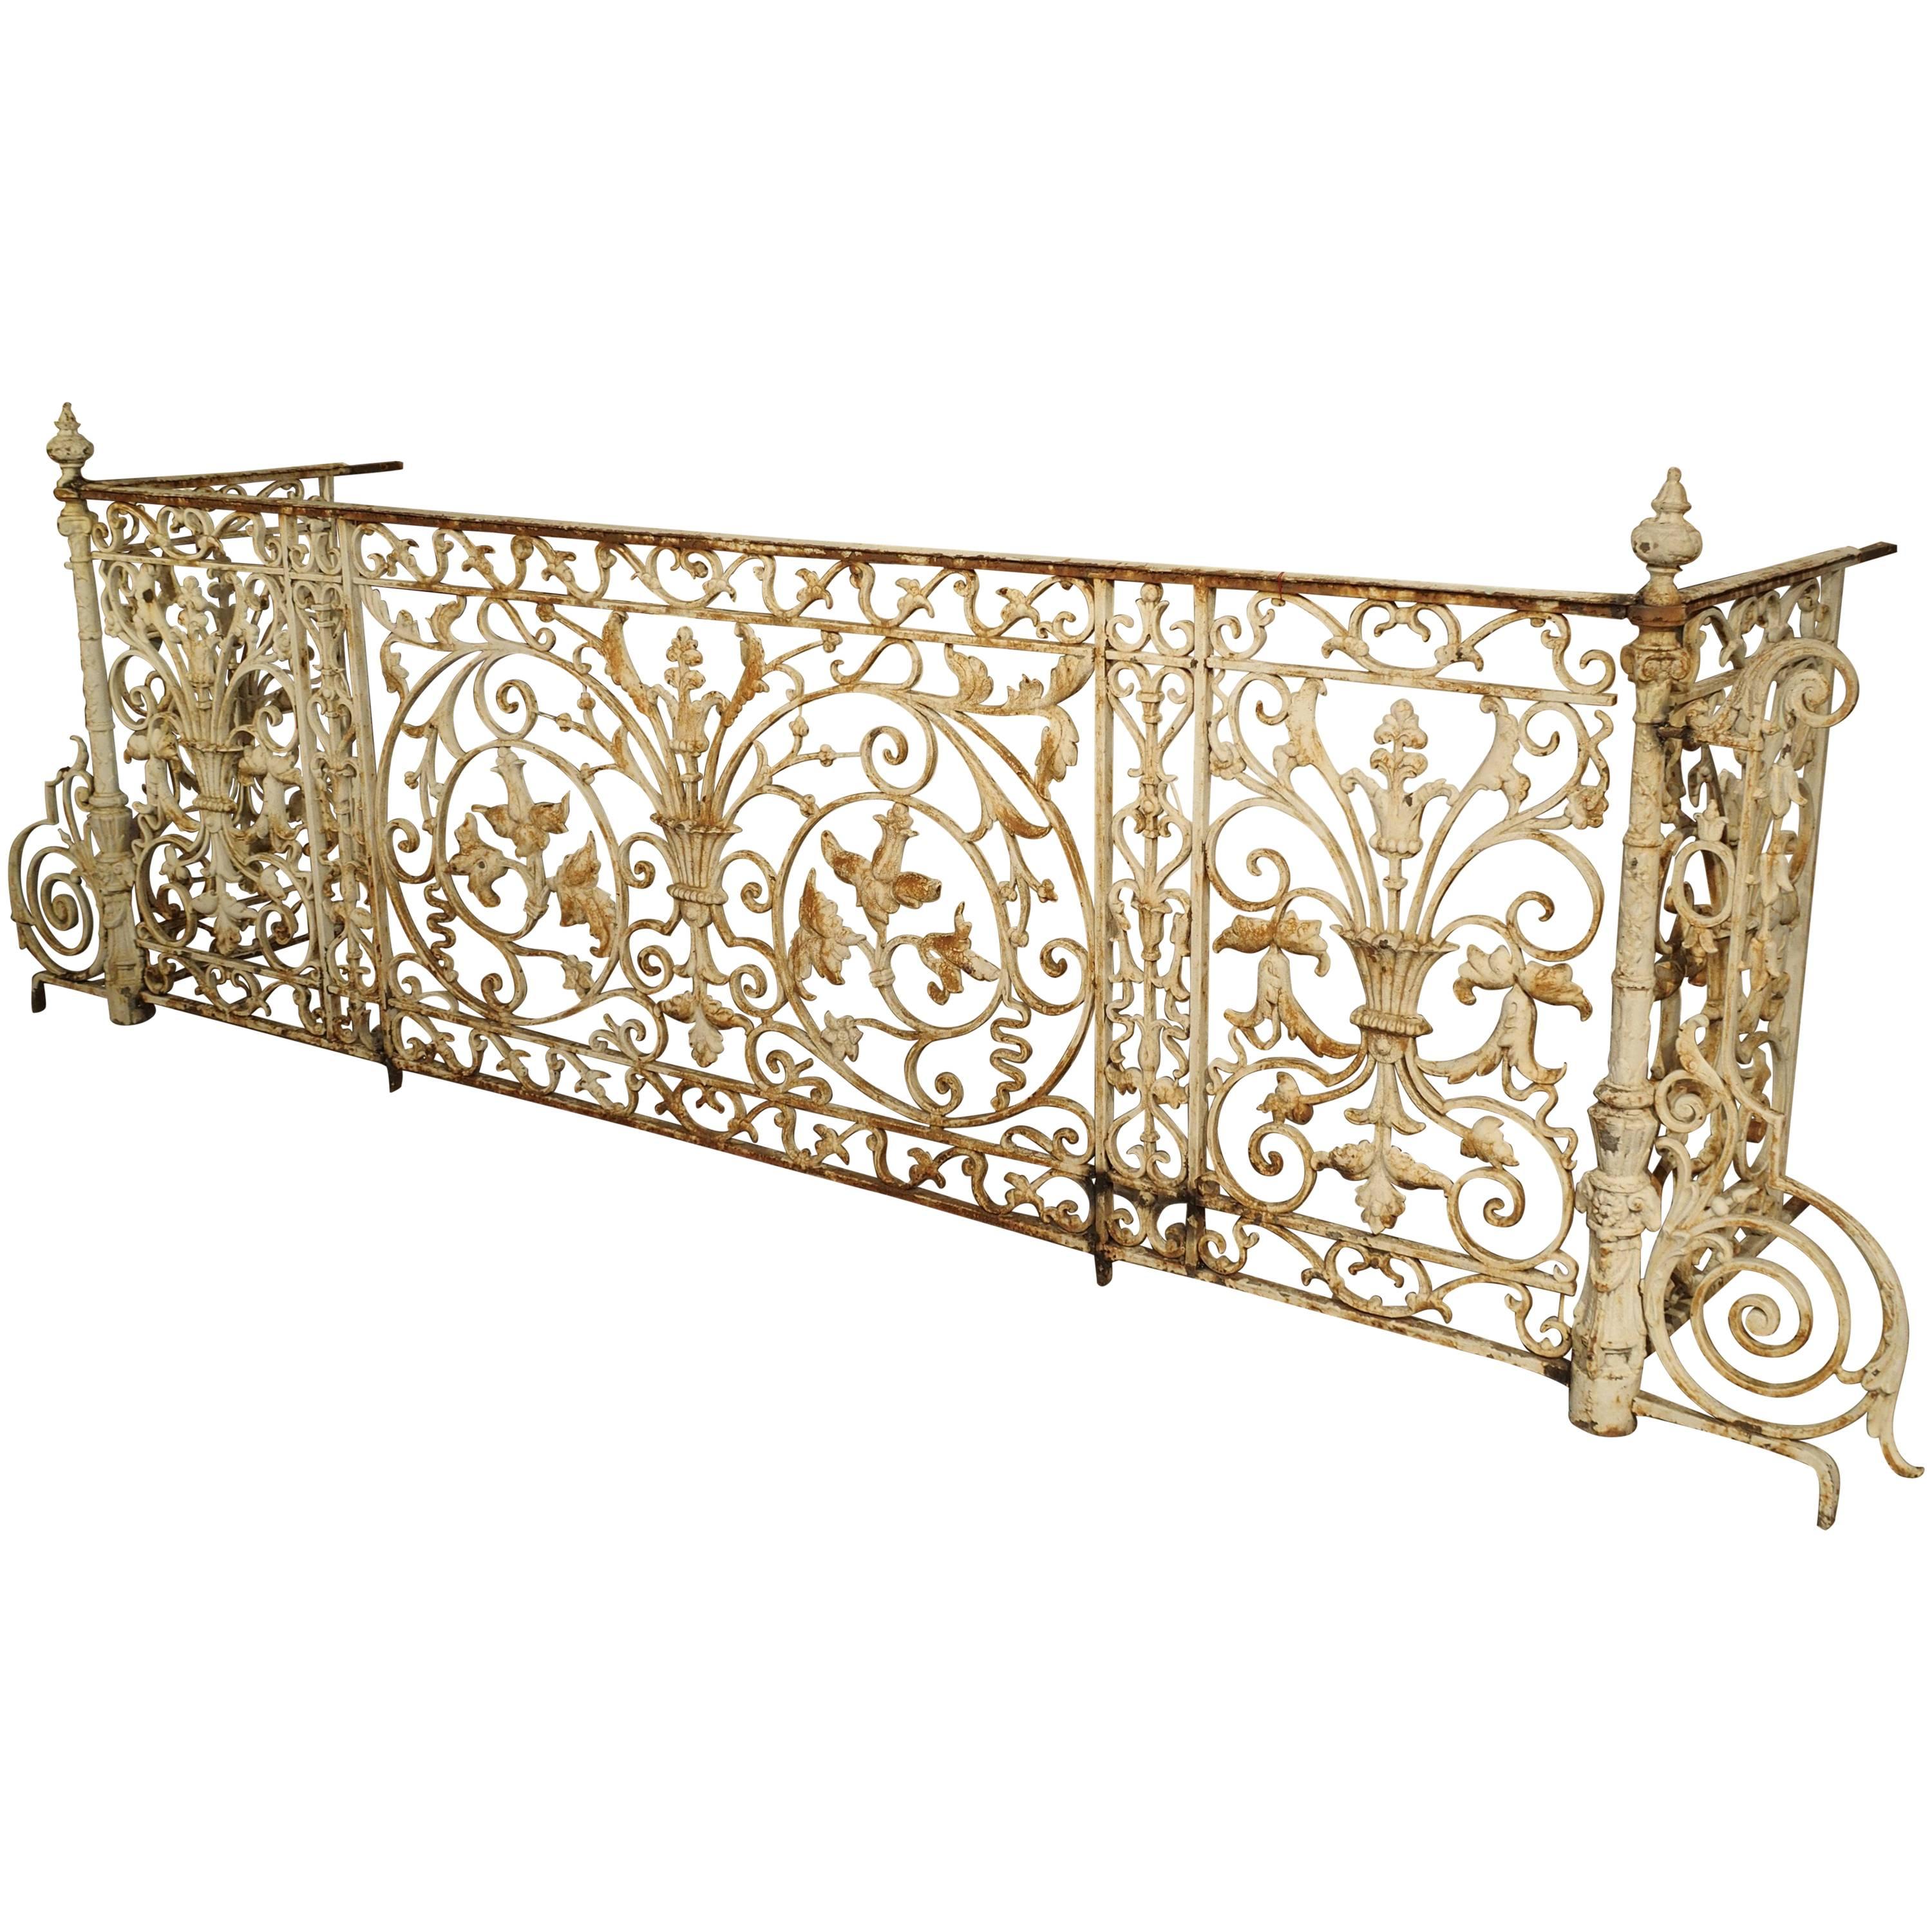 Circa 1860 Painted Cast Iron Balcony Railing from Montpellier, France